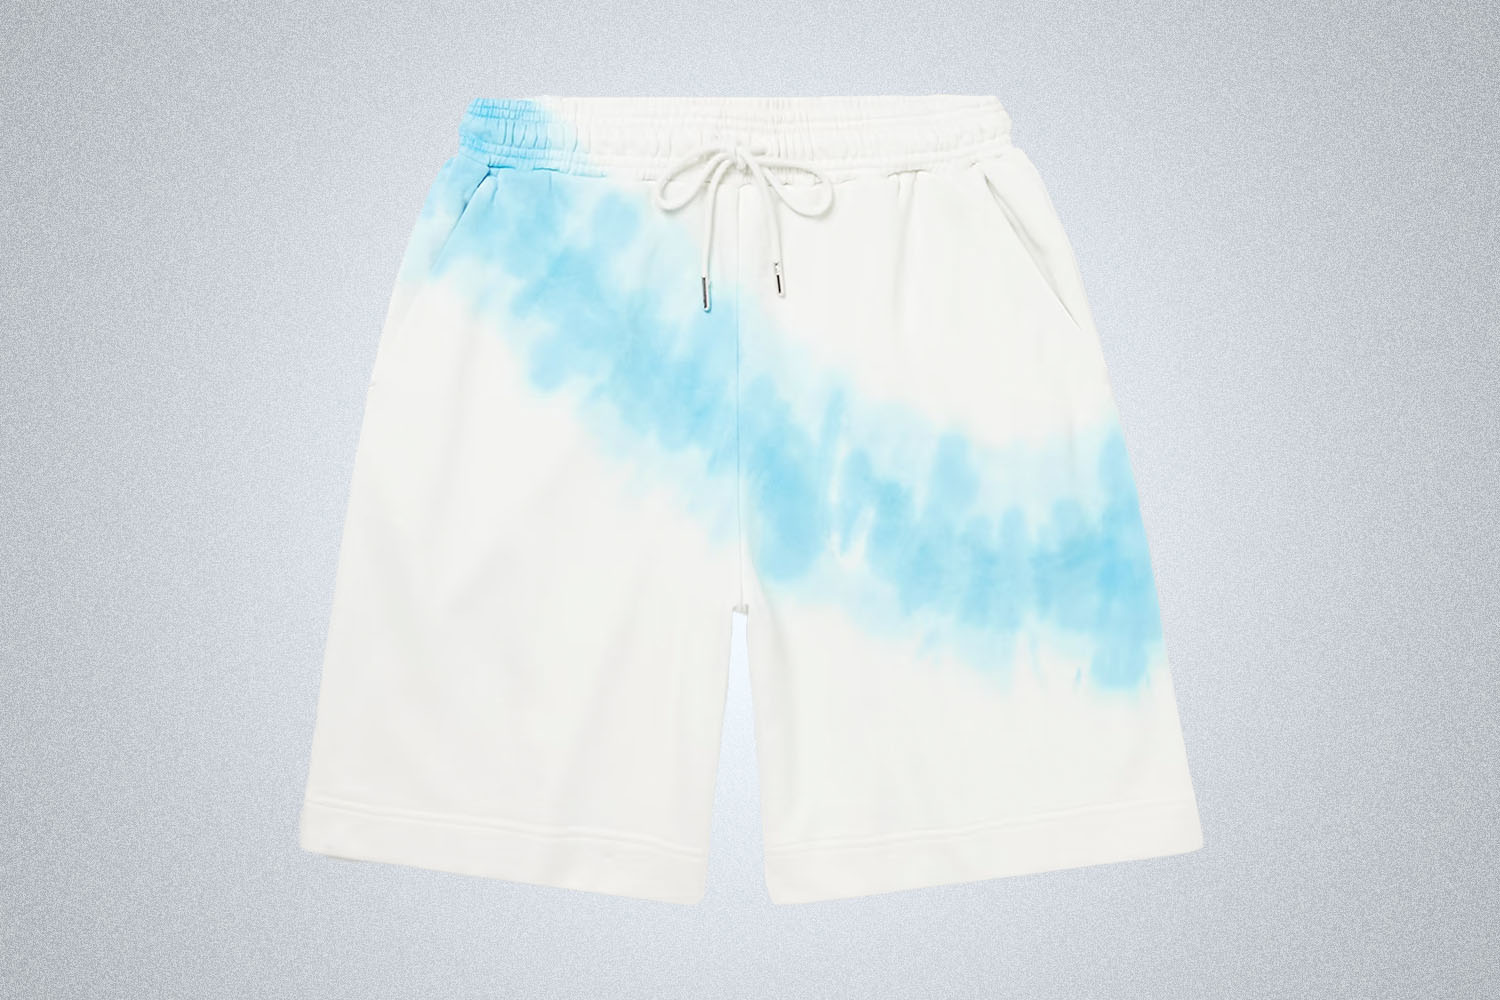 a pair of white shorts from Ninety Percent on a grey background